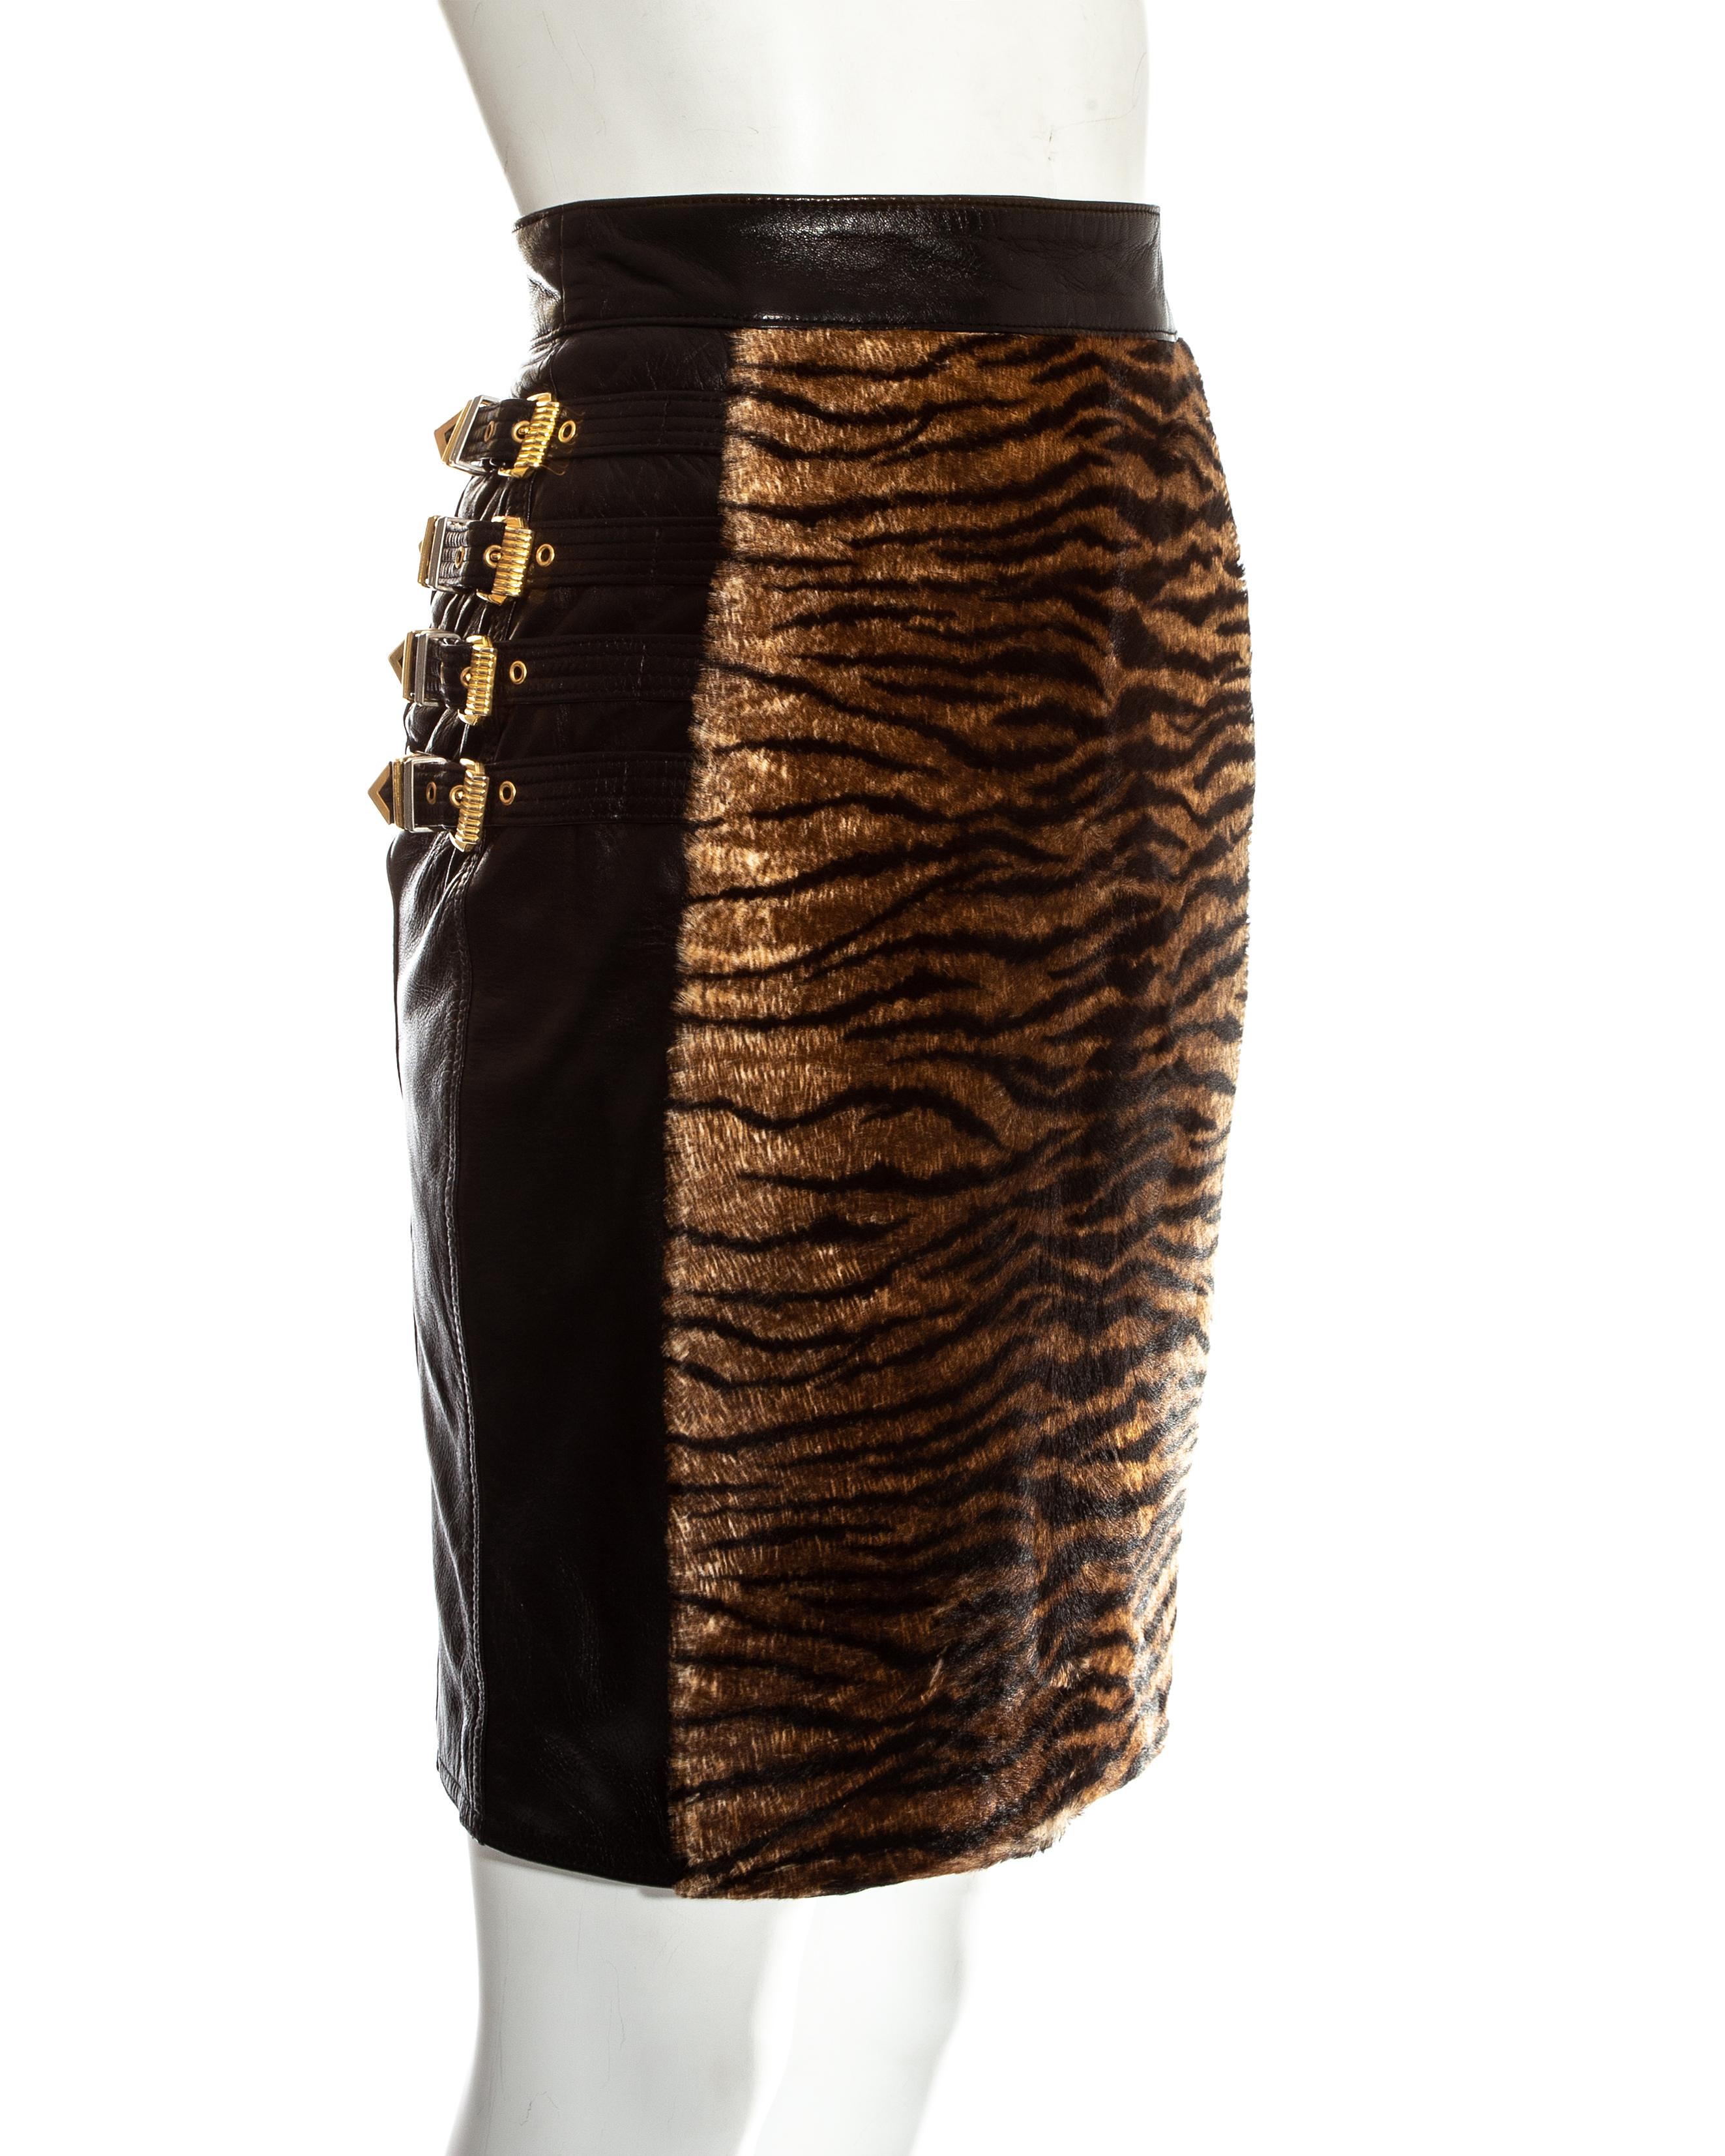 Women's Gianni Versace black leather gold buckled skirt with animal print, fw 1994 For Sale